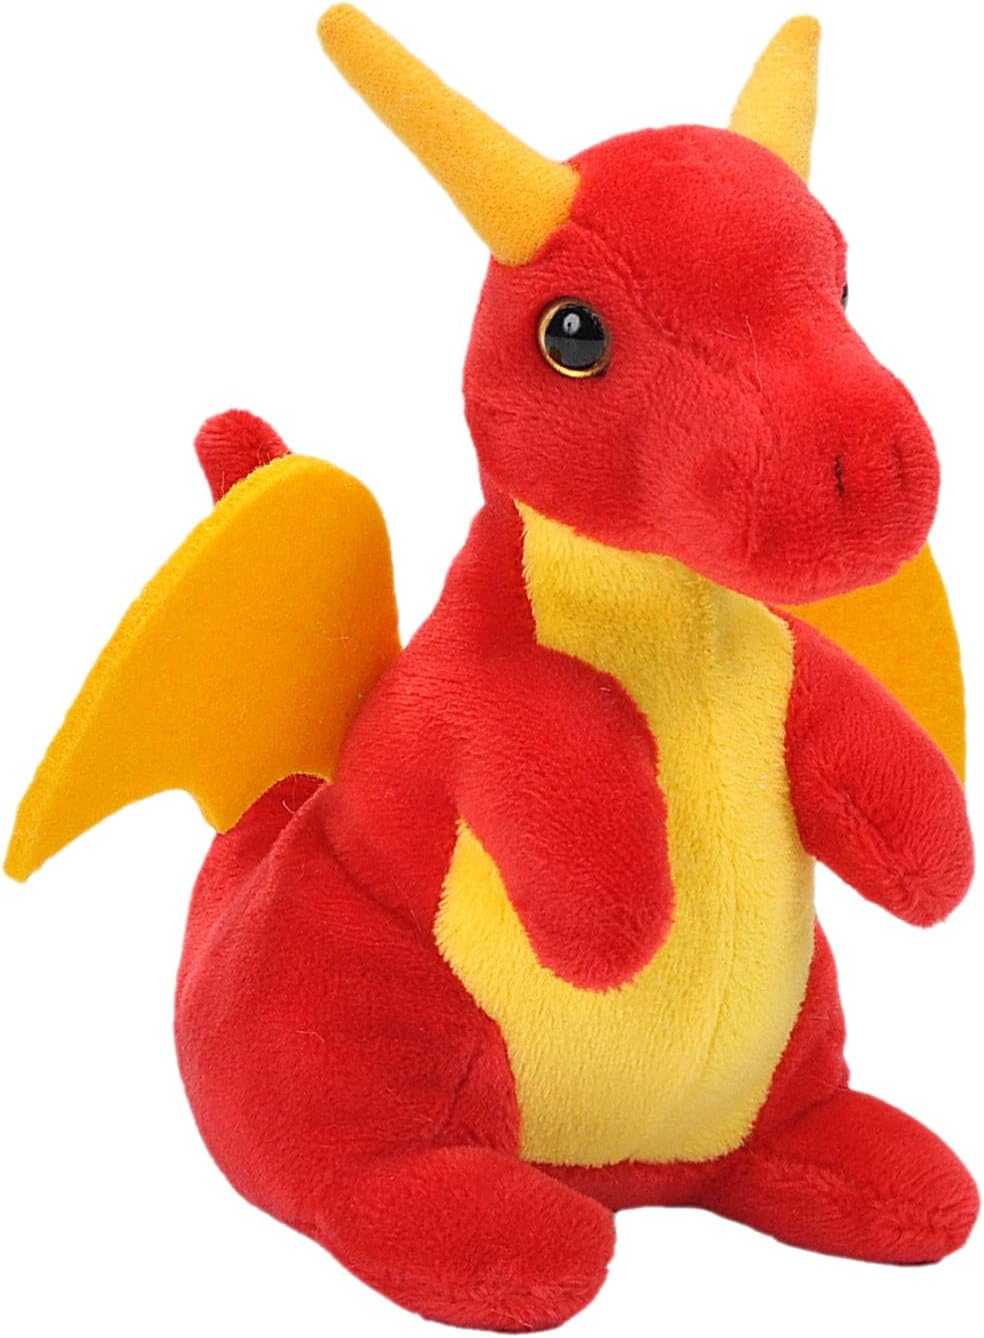 Wild Republic Pocketkins Eco Dragon, Stuffed Animal, 5 Inches, Plush Toy, Made from Recycled Materials, Eco Friendly